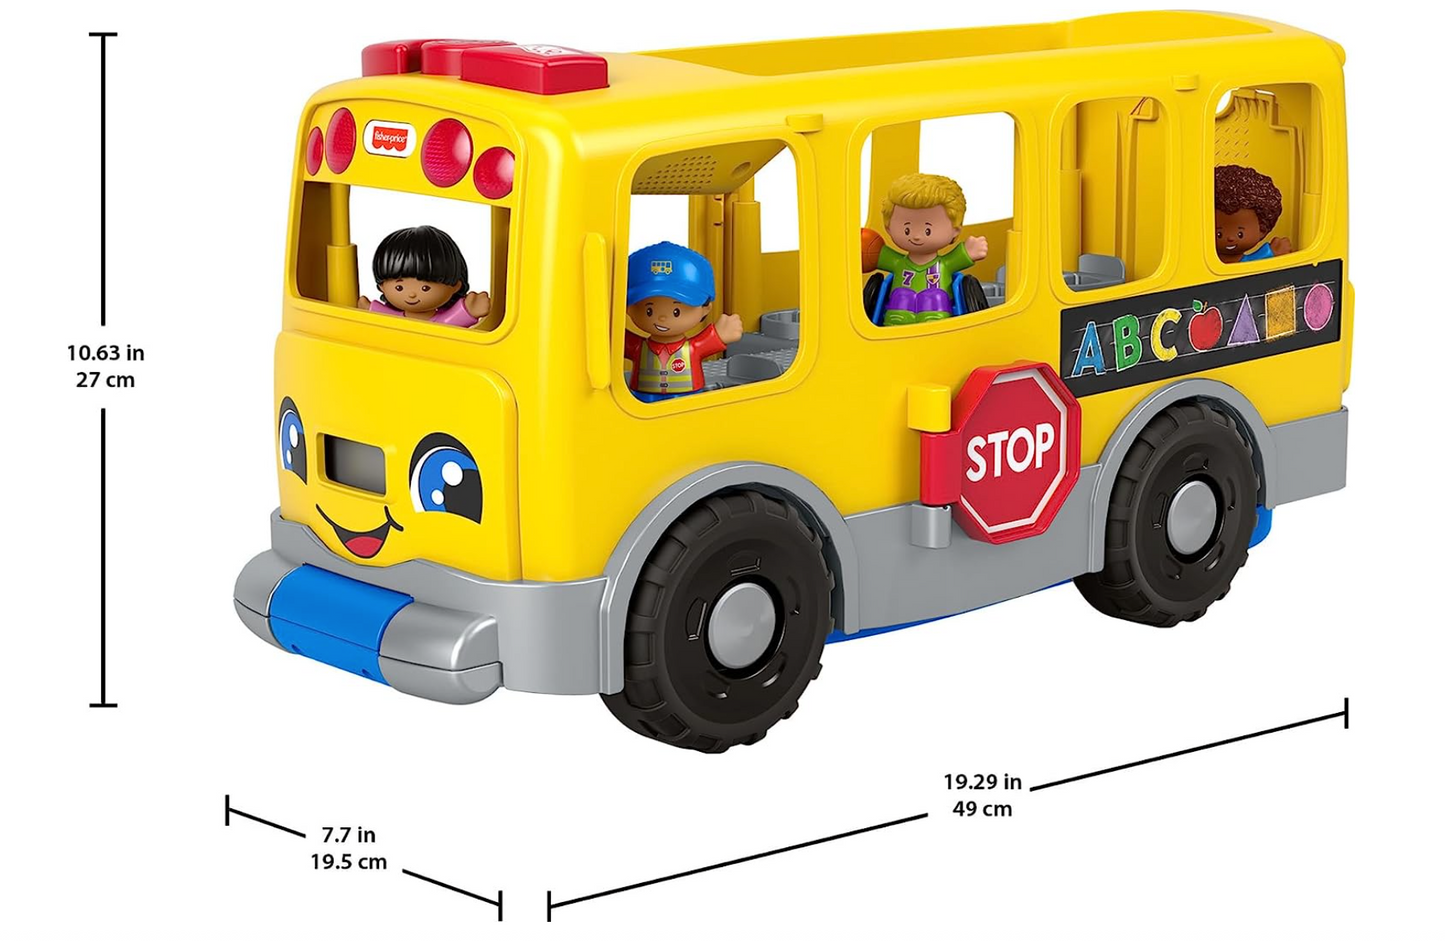 Fisher-Price Little People Toddler Learning Toy Big Yellow School Bus With Lights Sounds & Smart Stages, 4 Figures, Ages 1+ Years